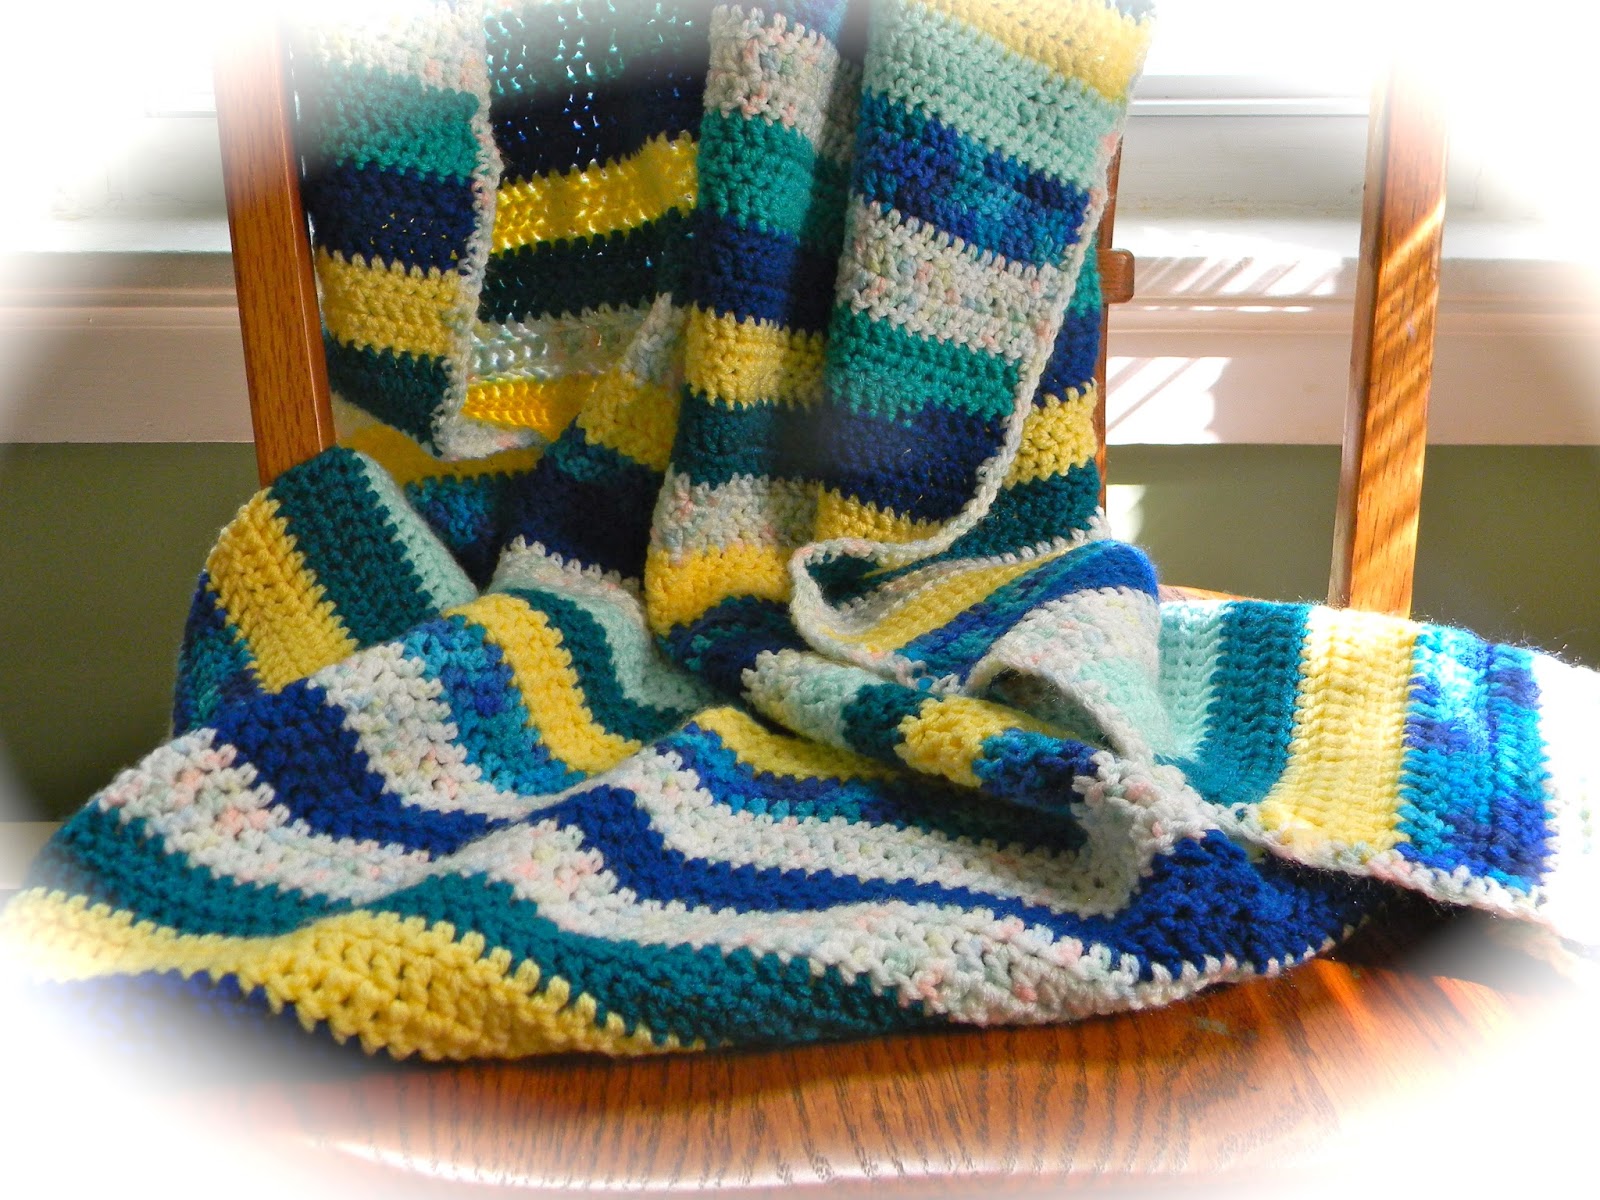 Home-Cooked & Handmade: Striped Double Crochet Blanket